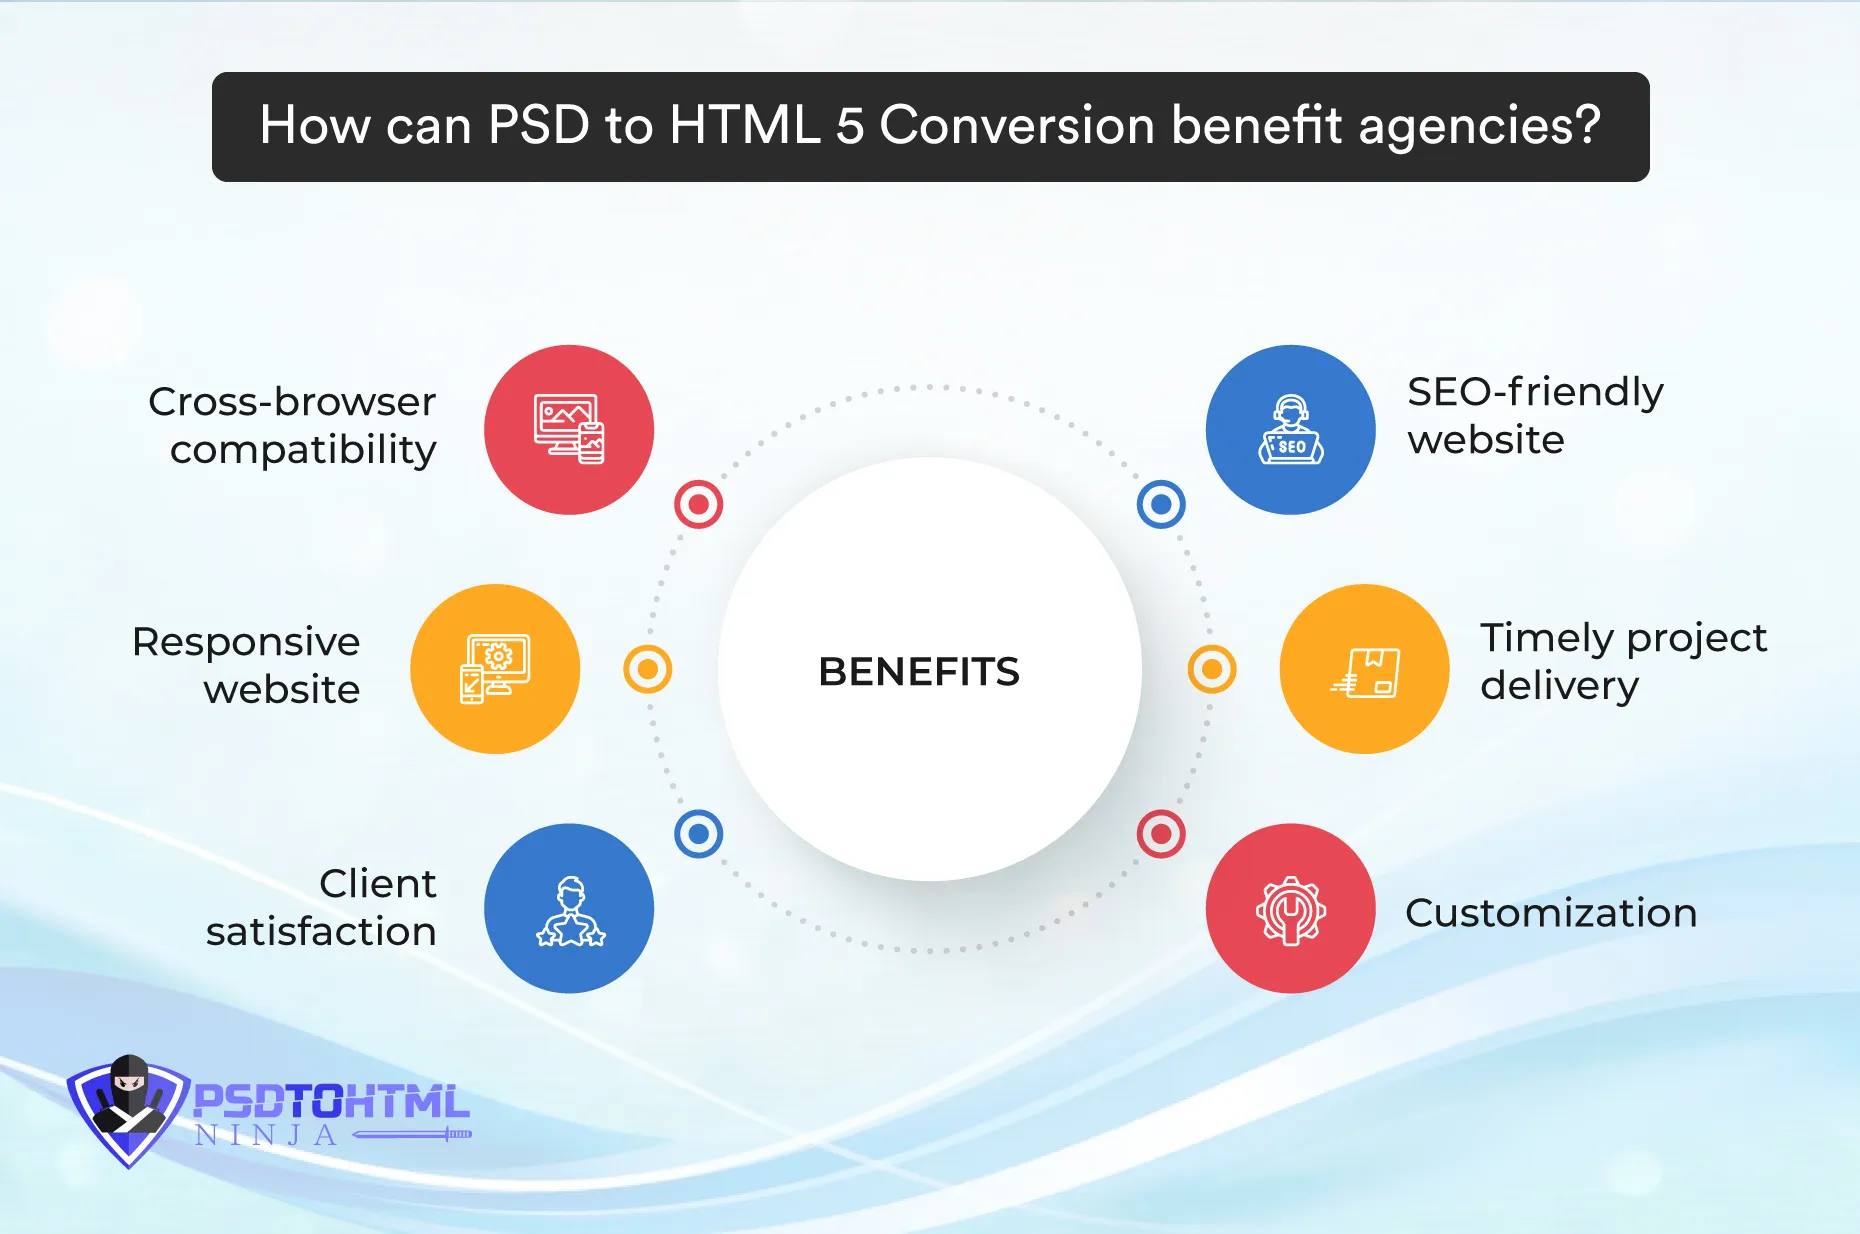 How can PSD to HTML 5 Conversion Benefit Agencies?